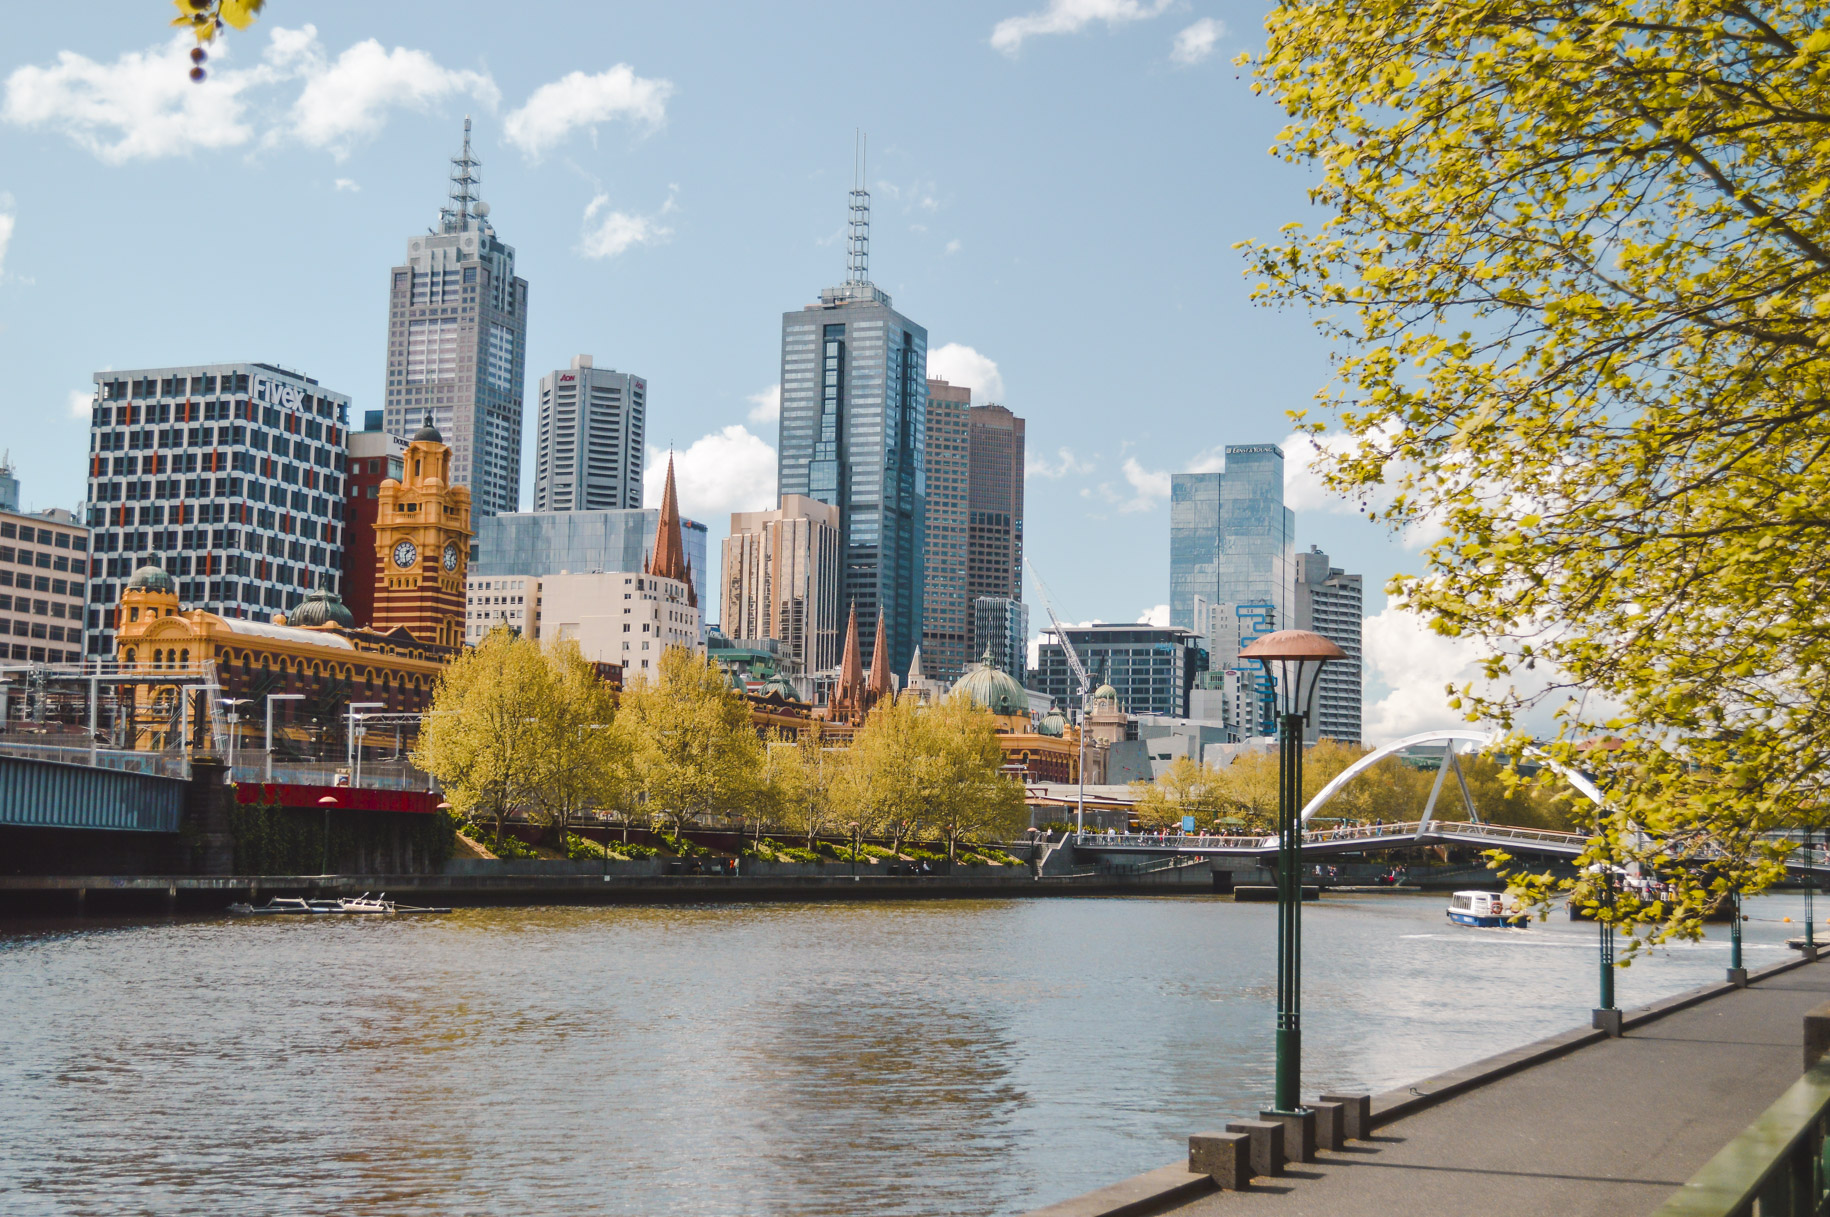 Move to Melbourne for views like this - looking across the Yarra River towards the Melbourne skyline.